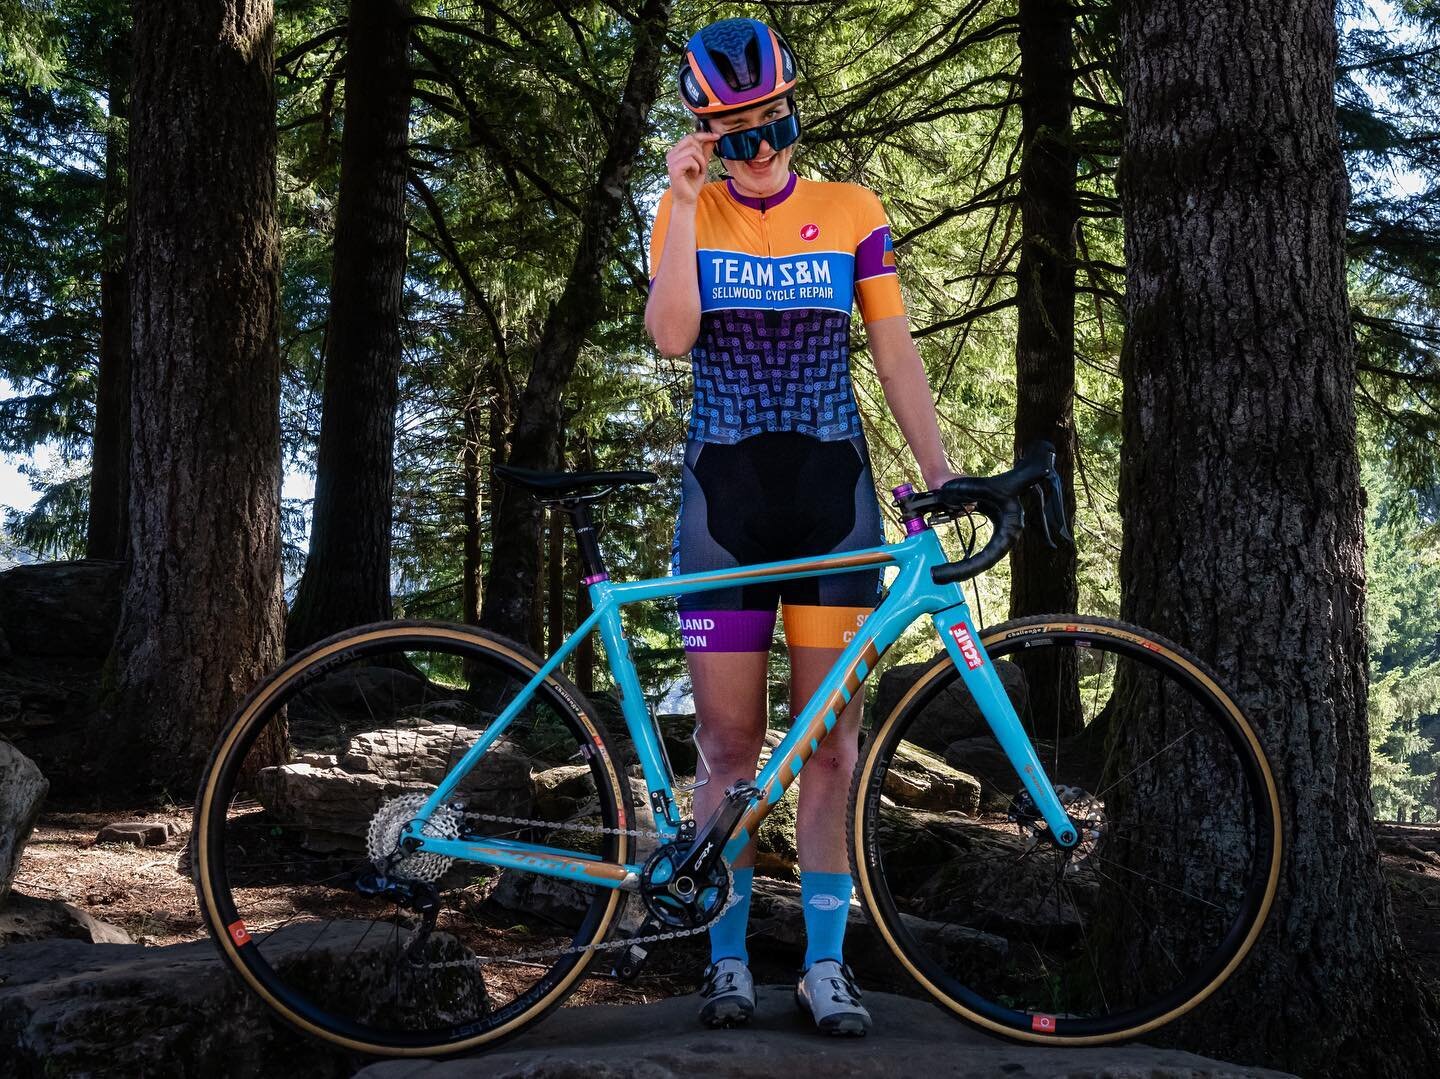 😉😉😉 @sophenberger is set to rip the &lsquo;22 Women&rsquo;s Singlespeed National Championships today at 2:30pm EST! Catch it live on @flobikes!! ⚙️🔥 
📸: @dcmediahaus 
#teamsandmcx #workingclasscyclocross #doitthehardway #sscx